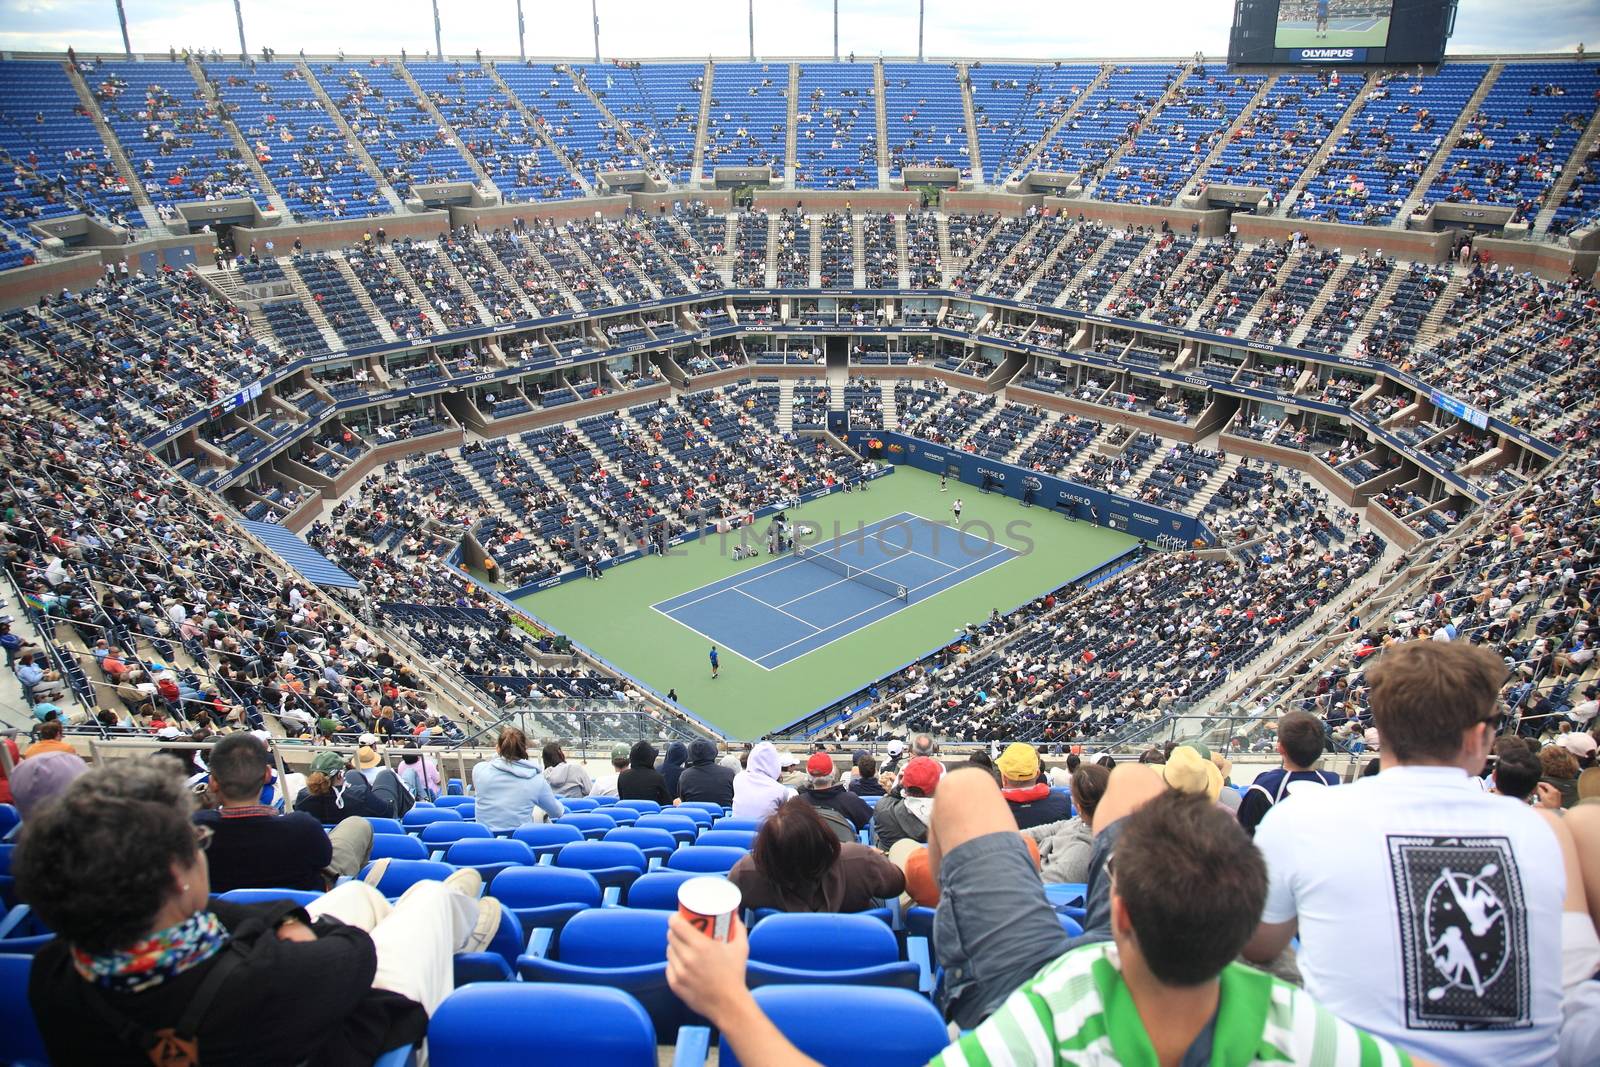 Ashe Stadium - US Open Tennis by Ffooter